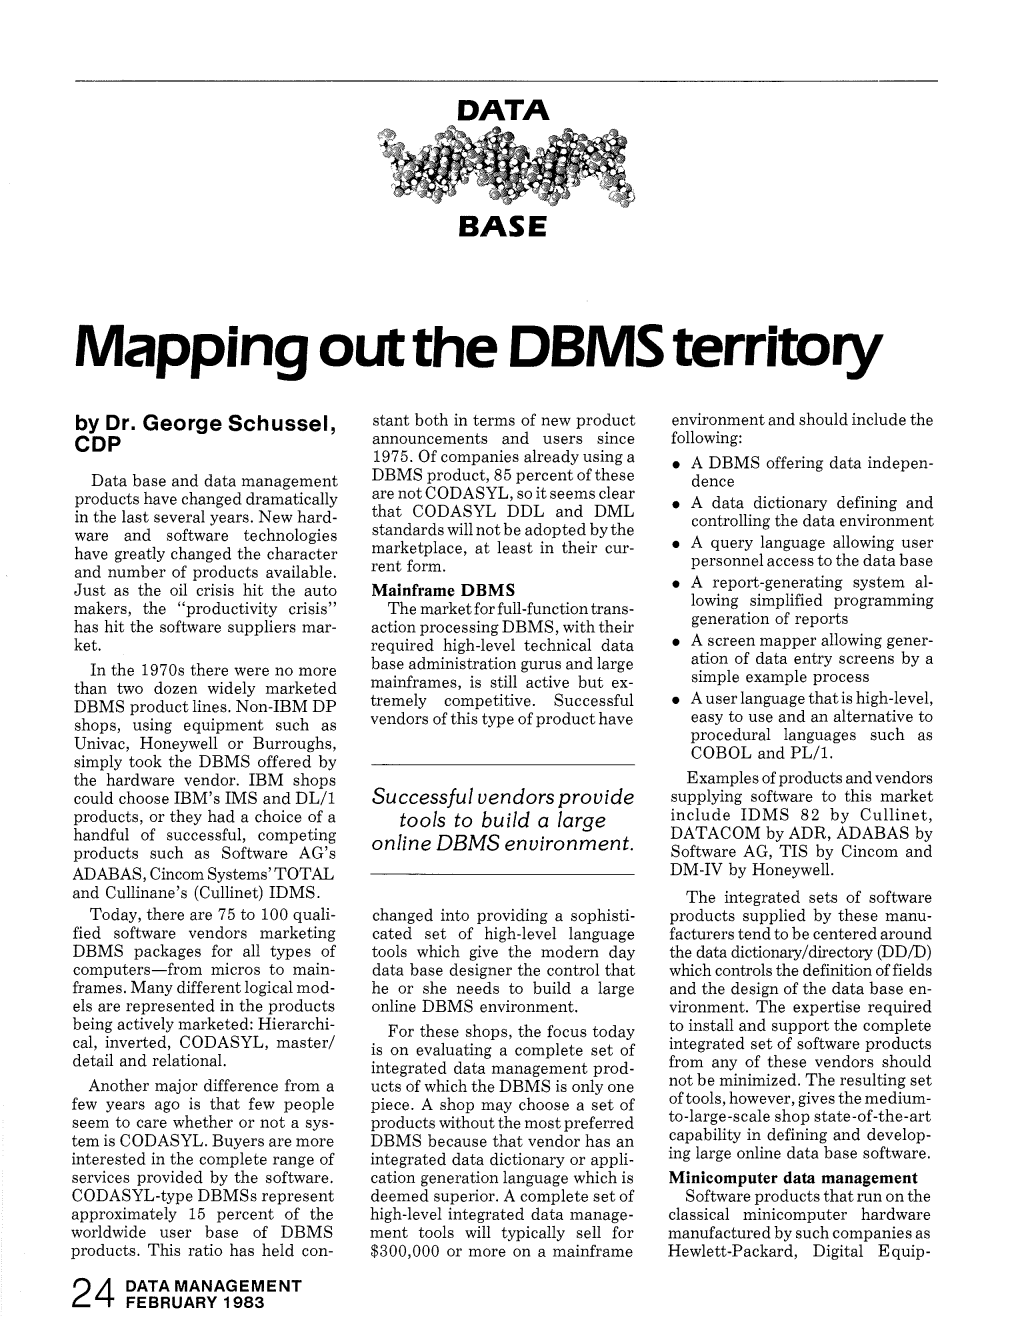 Mapping out the DBMS Territory